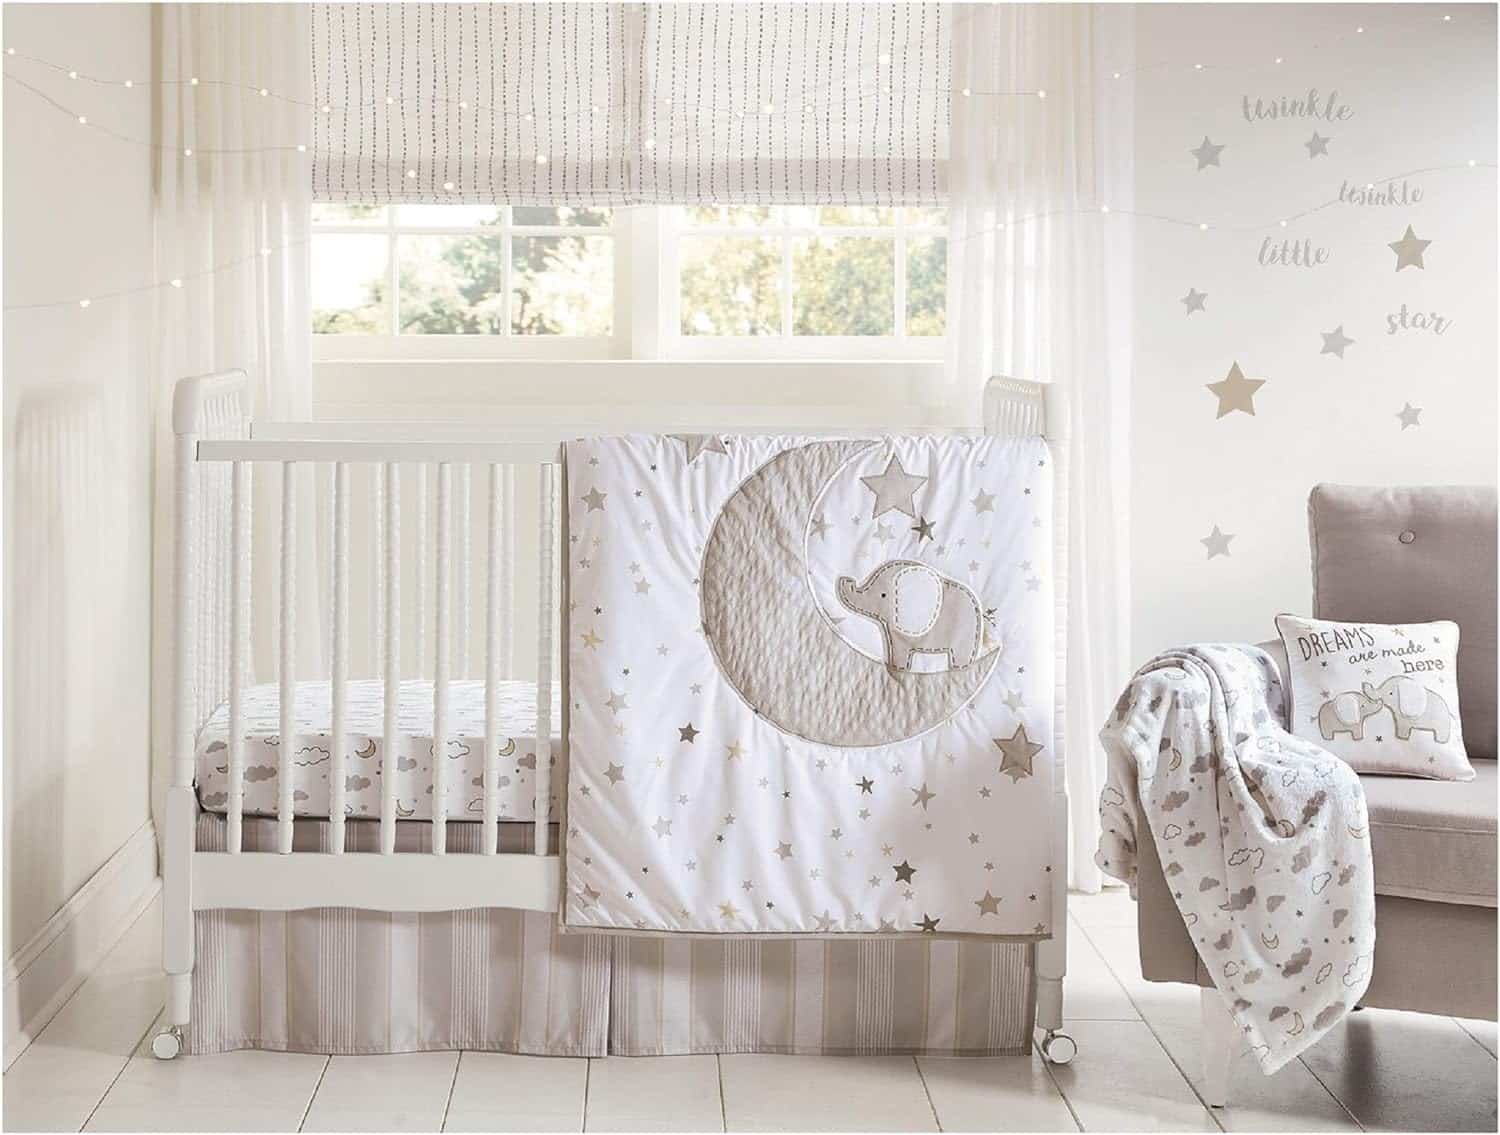 Wendy Bellissimo 4pc Nursery Bedding Baby Crib Bedding Set (Elephant) - A Stylish and Durable Choice for Your Baby's Nursery